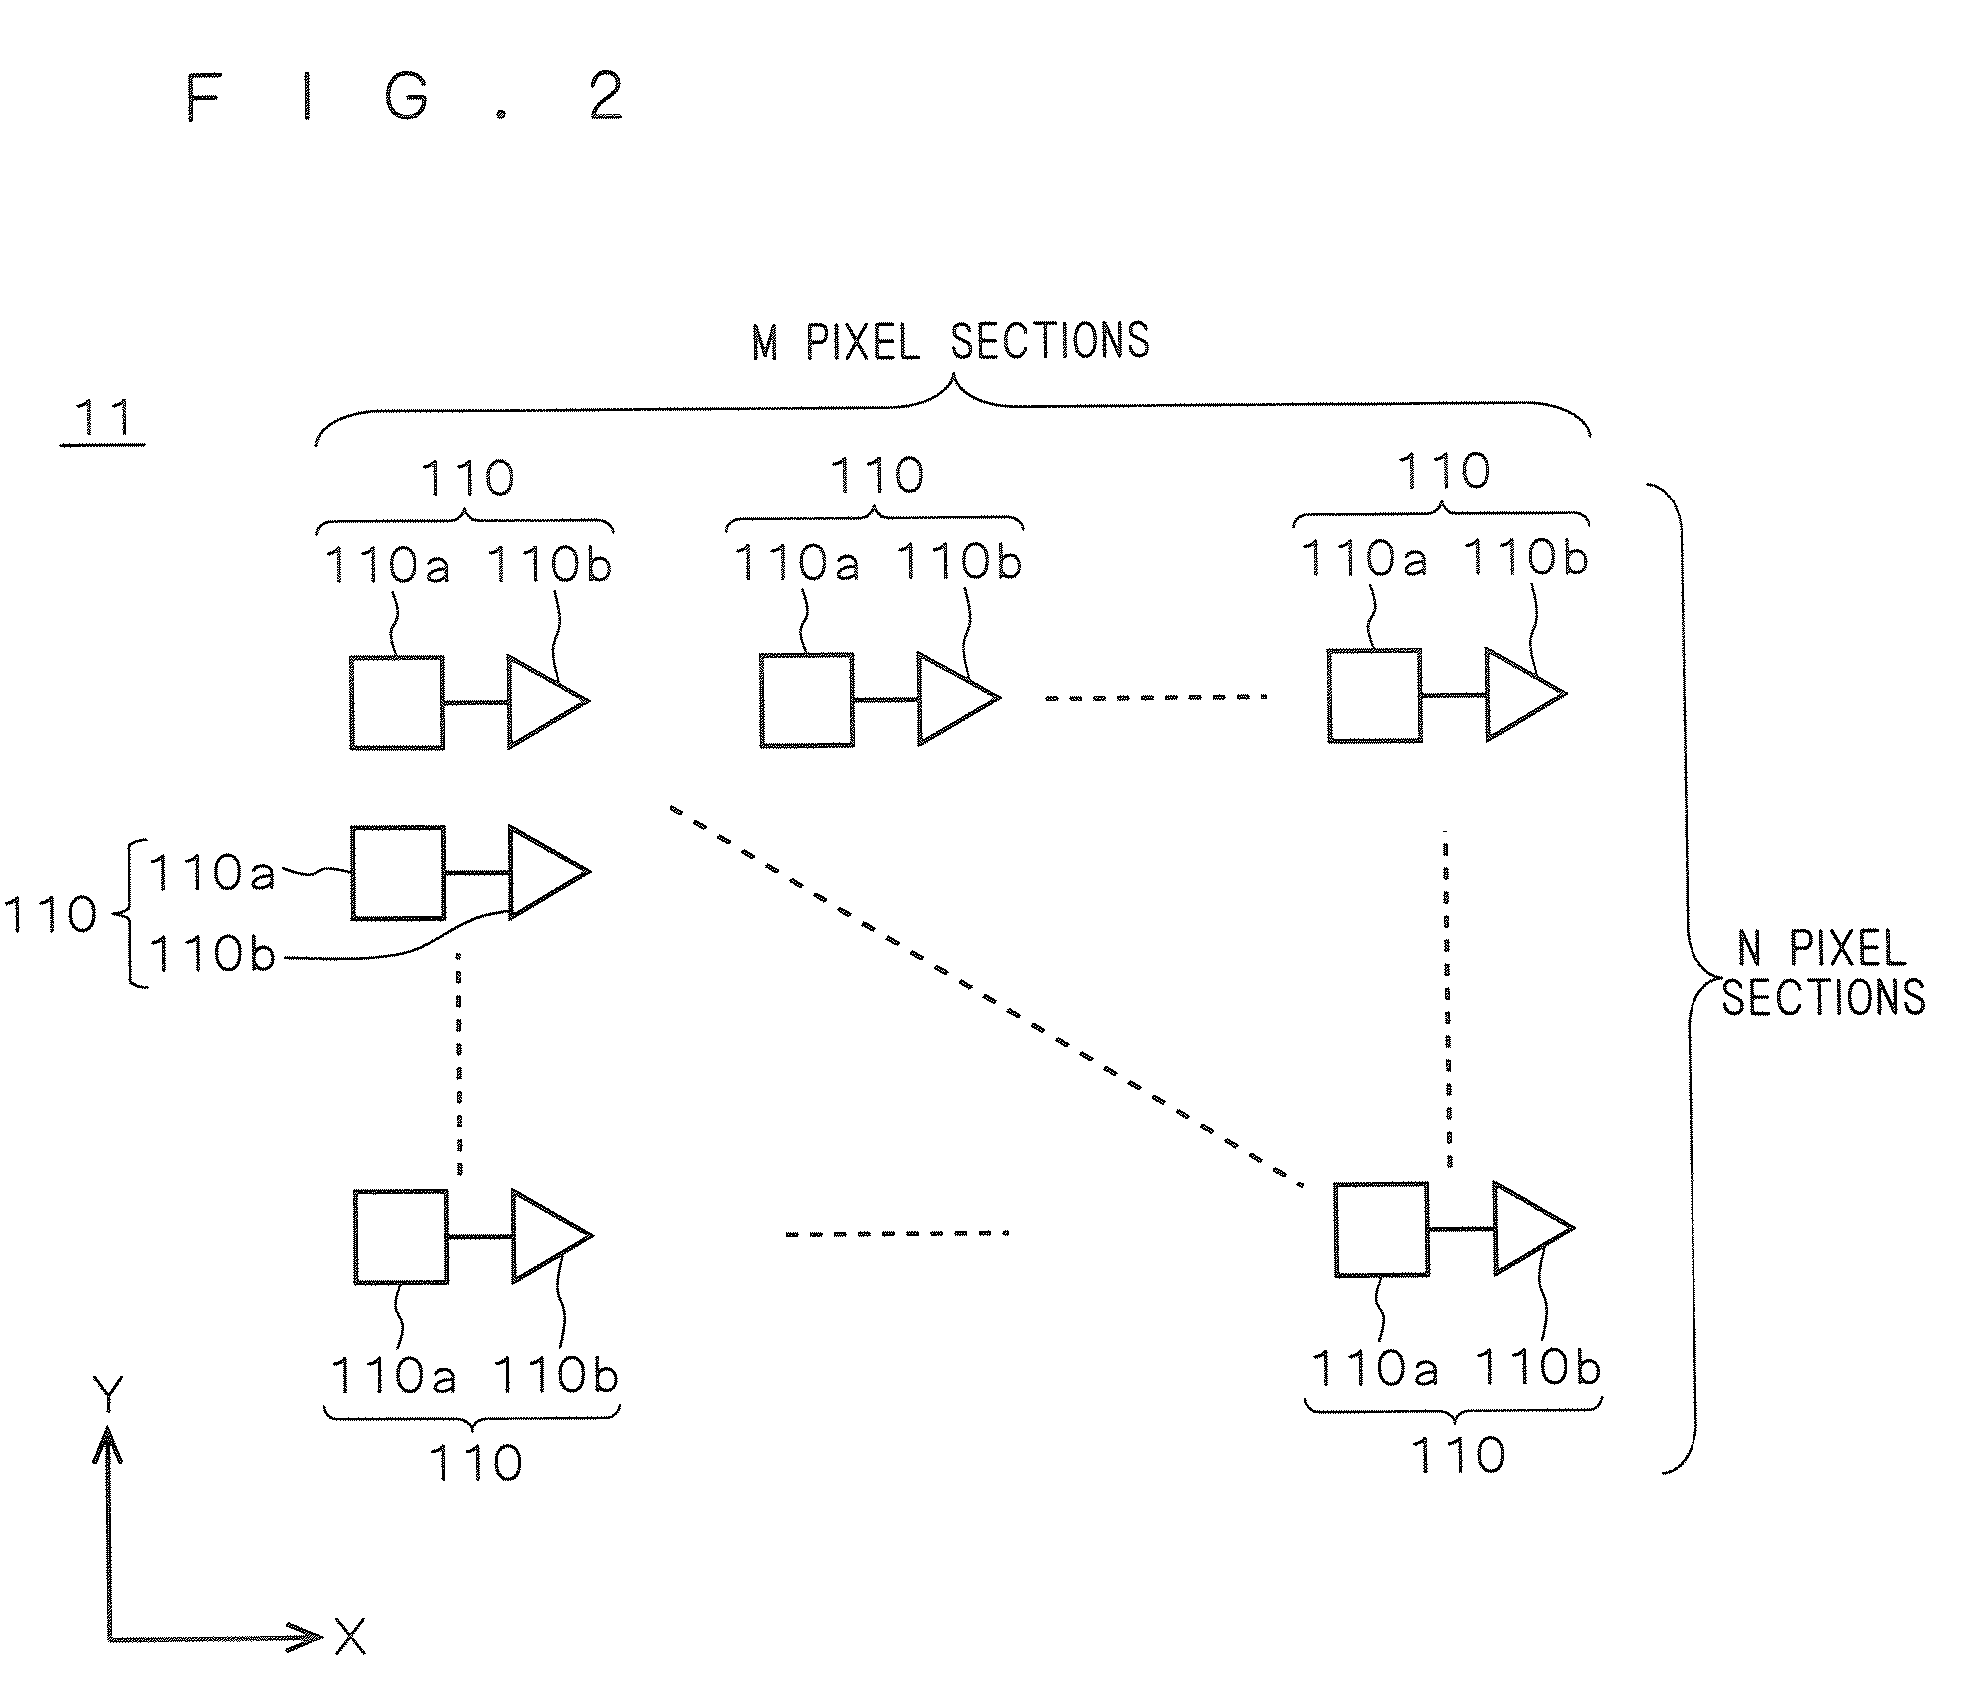 Image processor and camera system for correcting image distortion